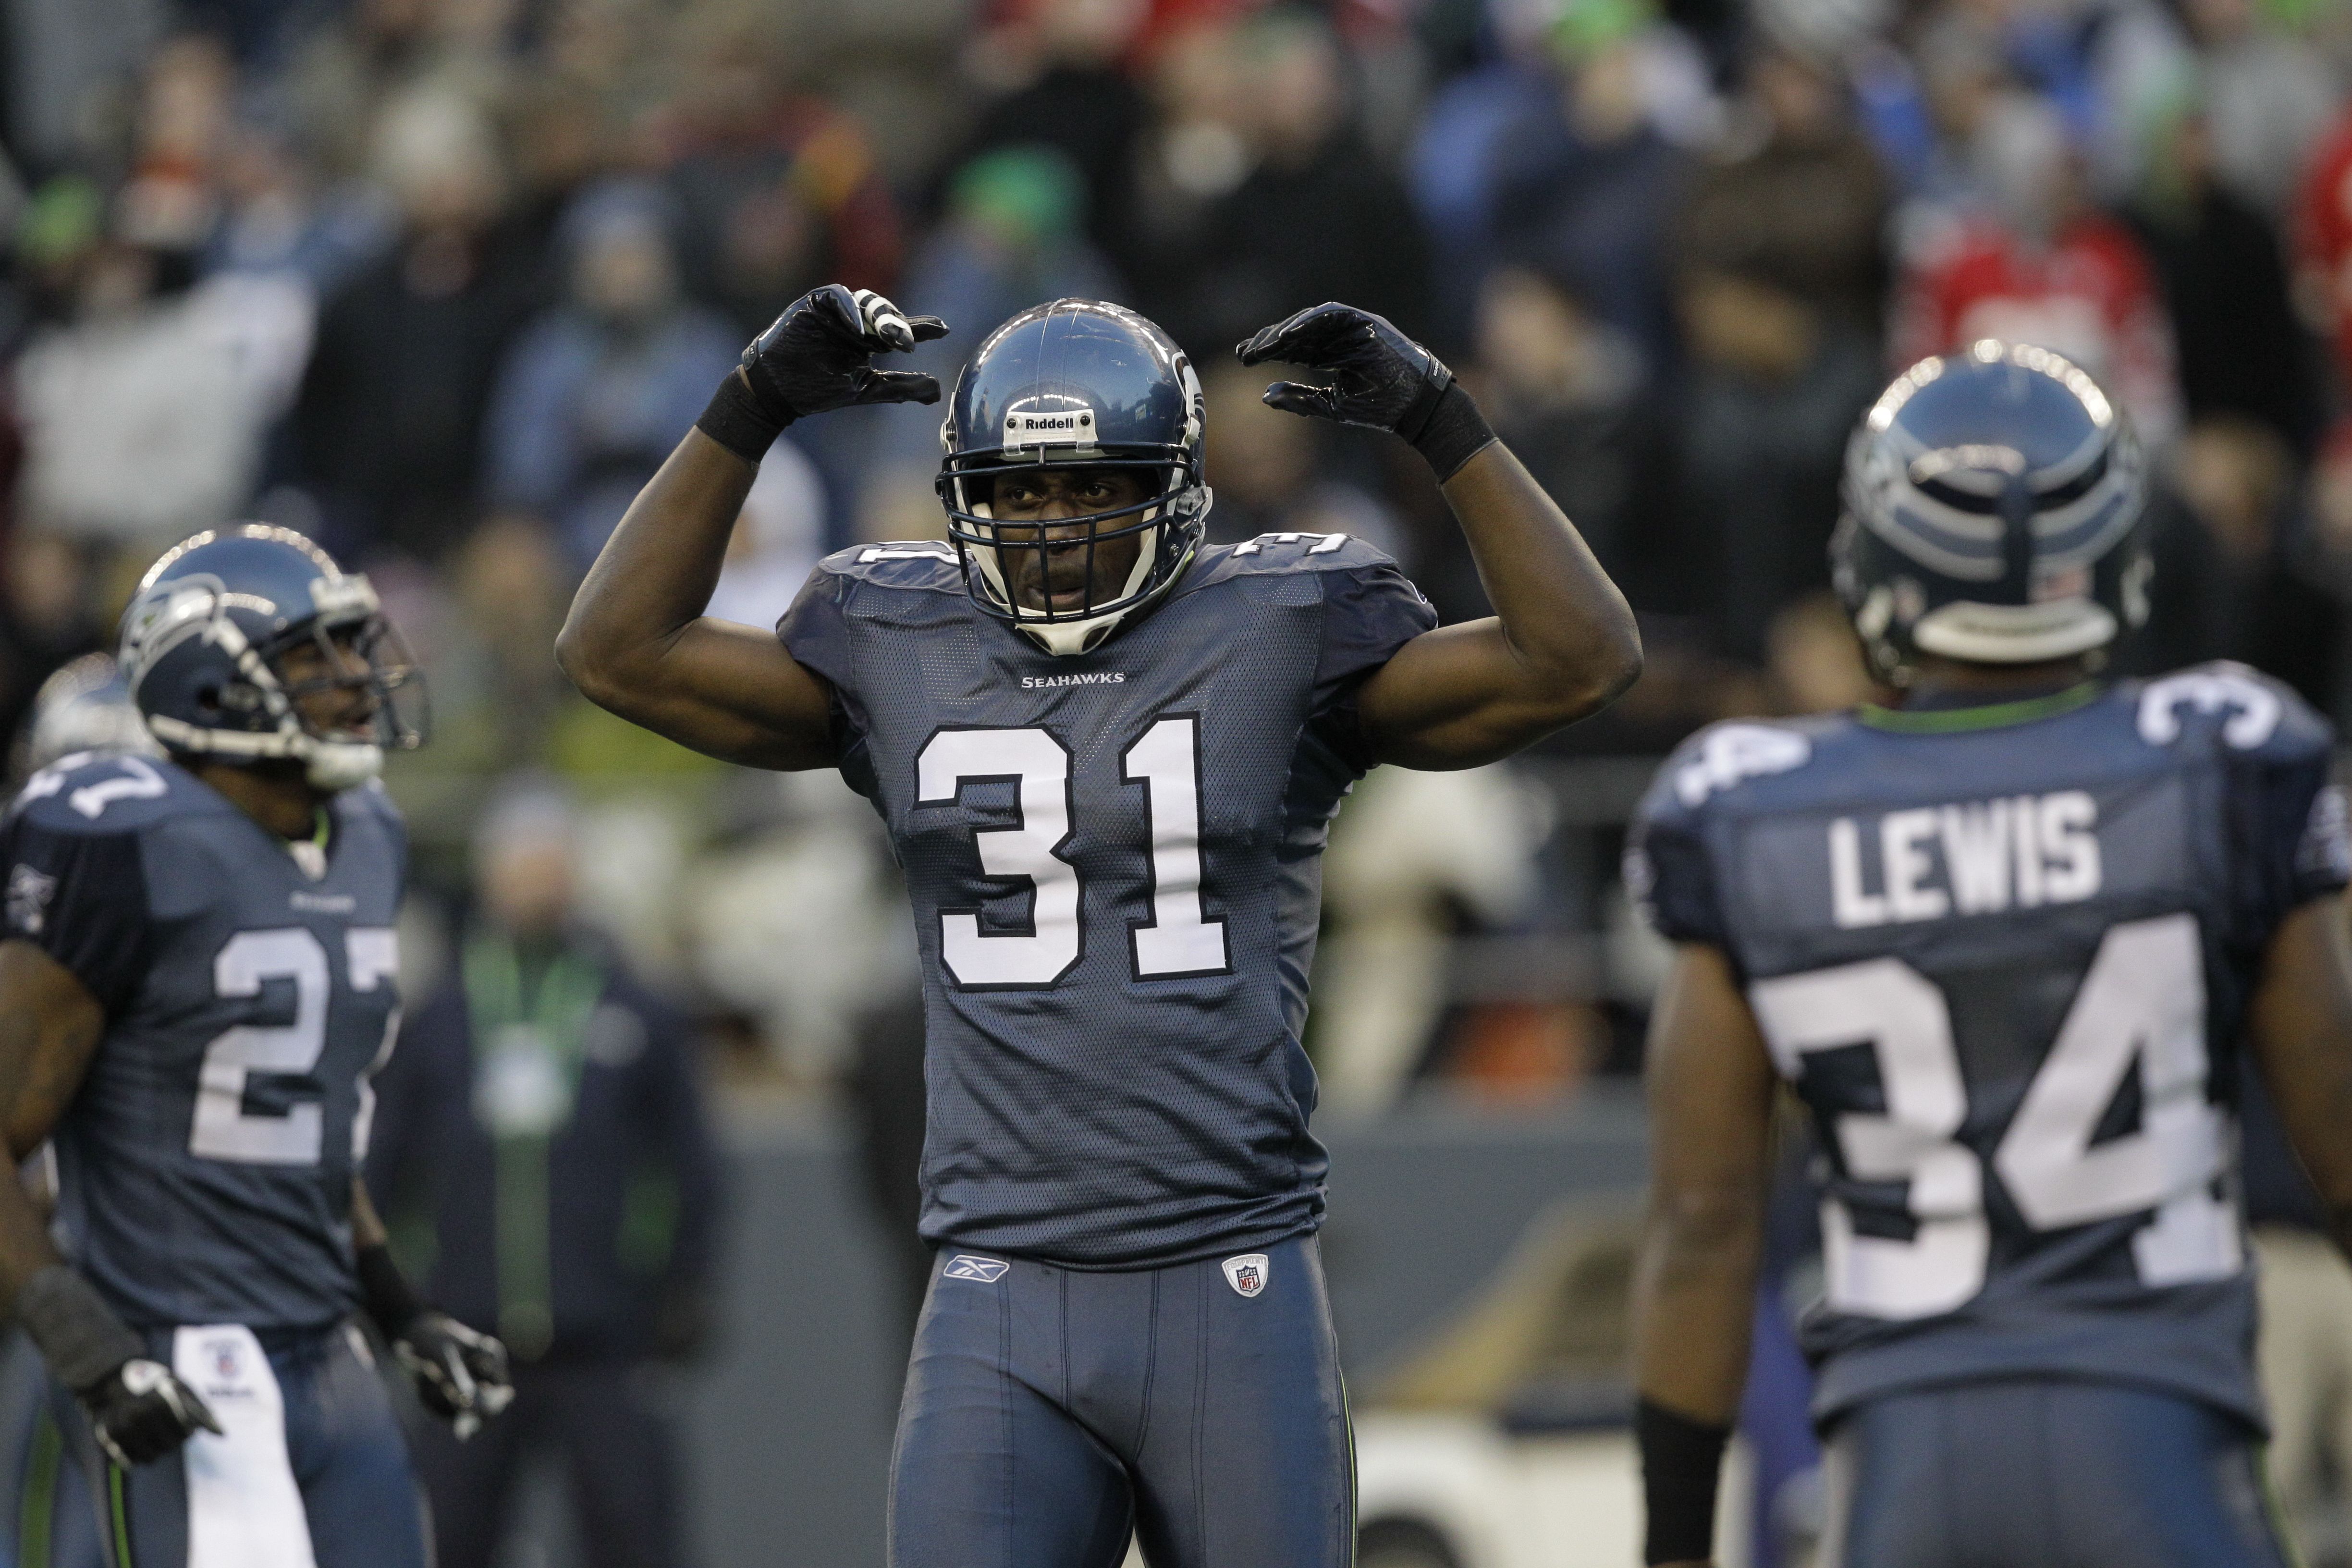 Morning links: Browner, Chancellor added to Pro Bowl roster